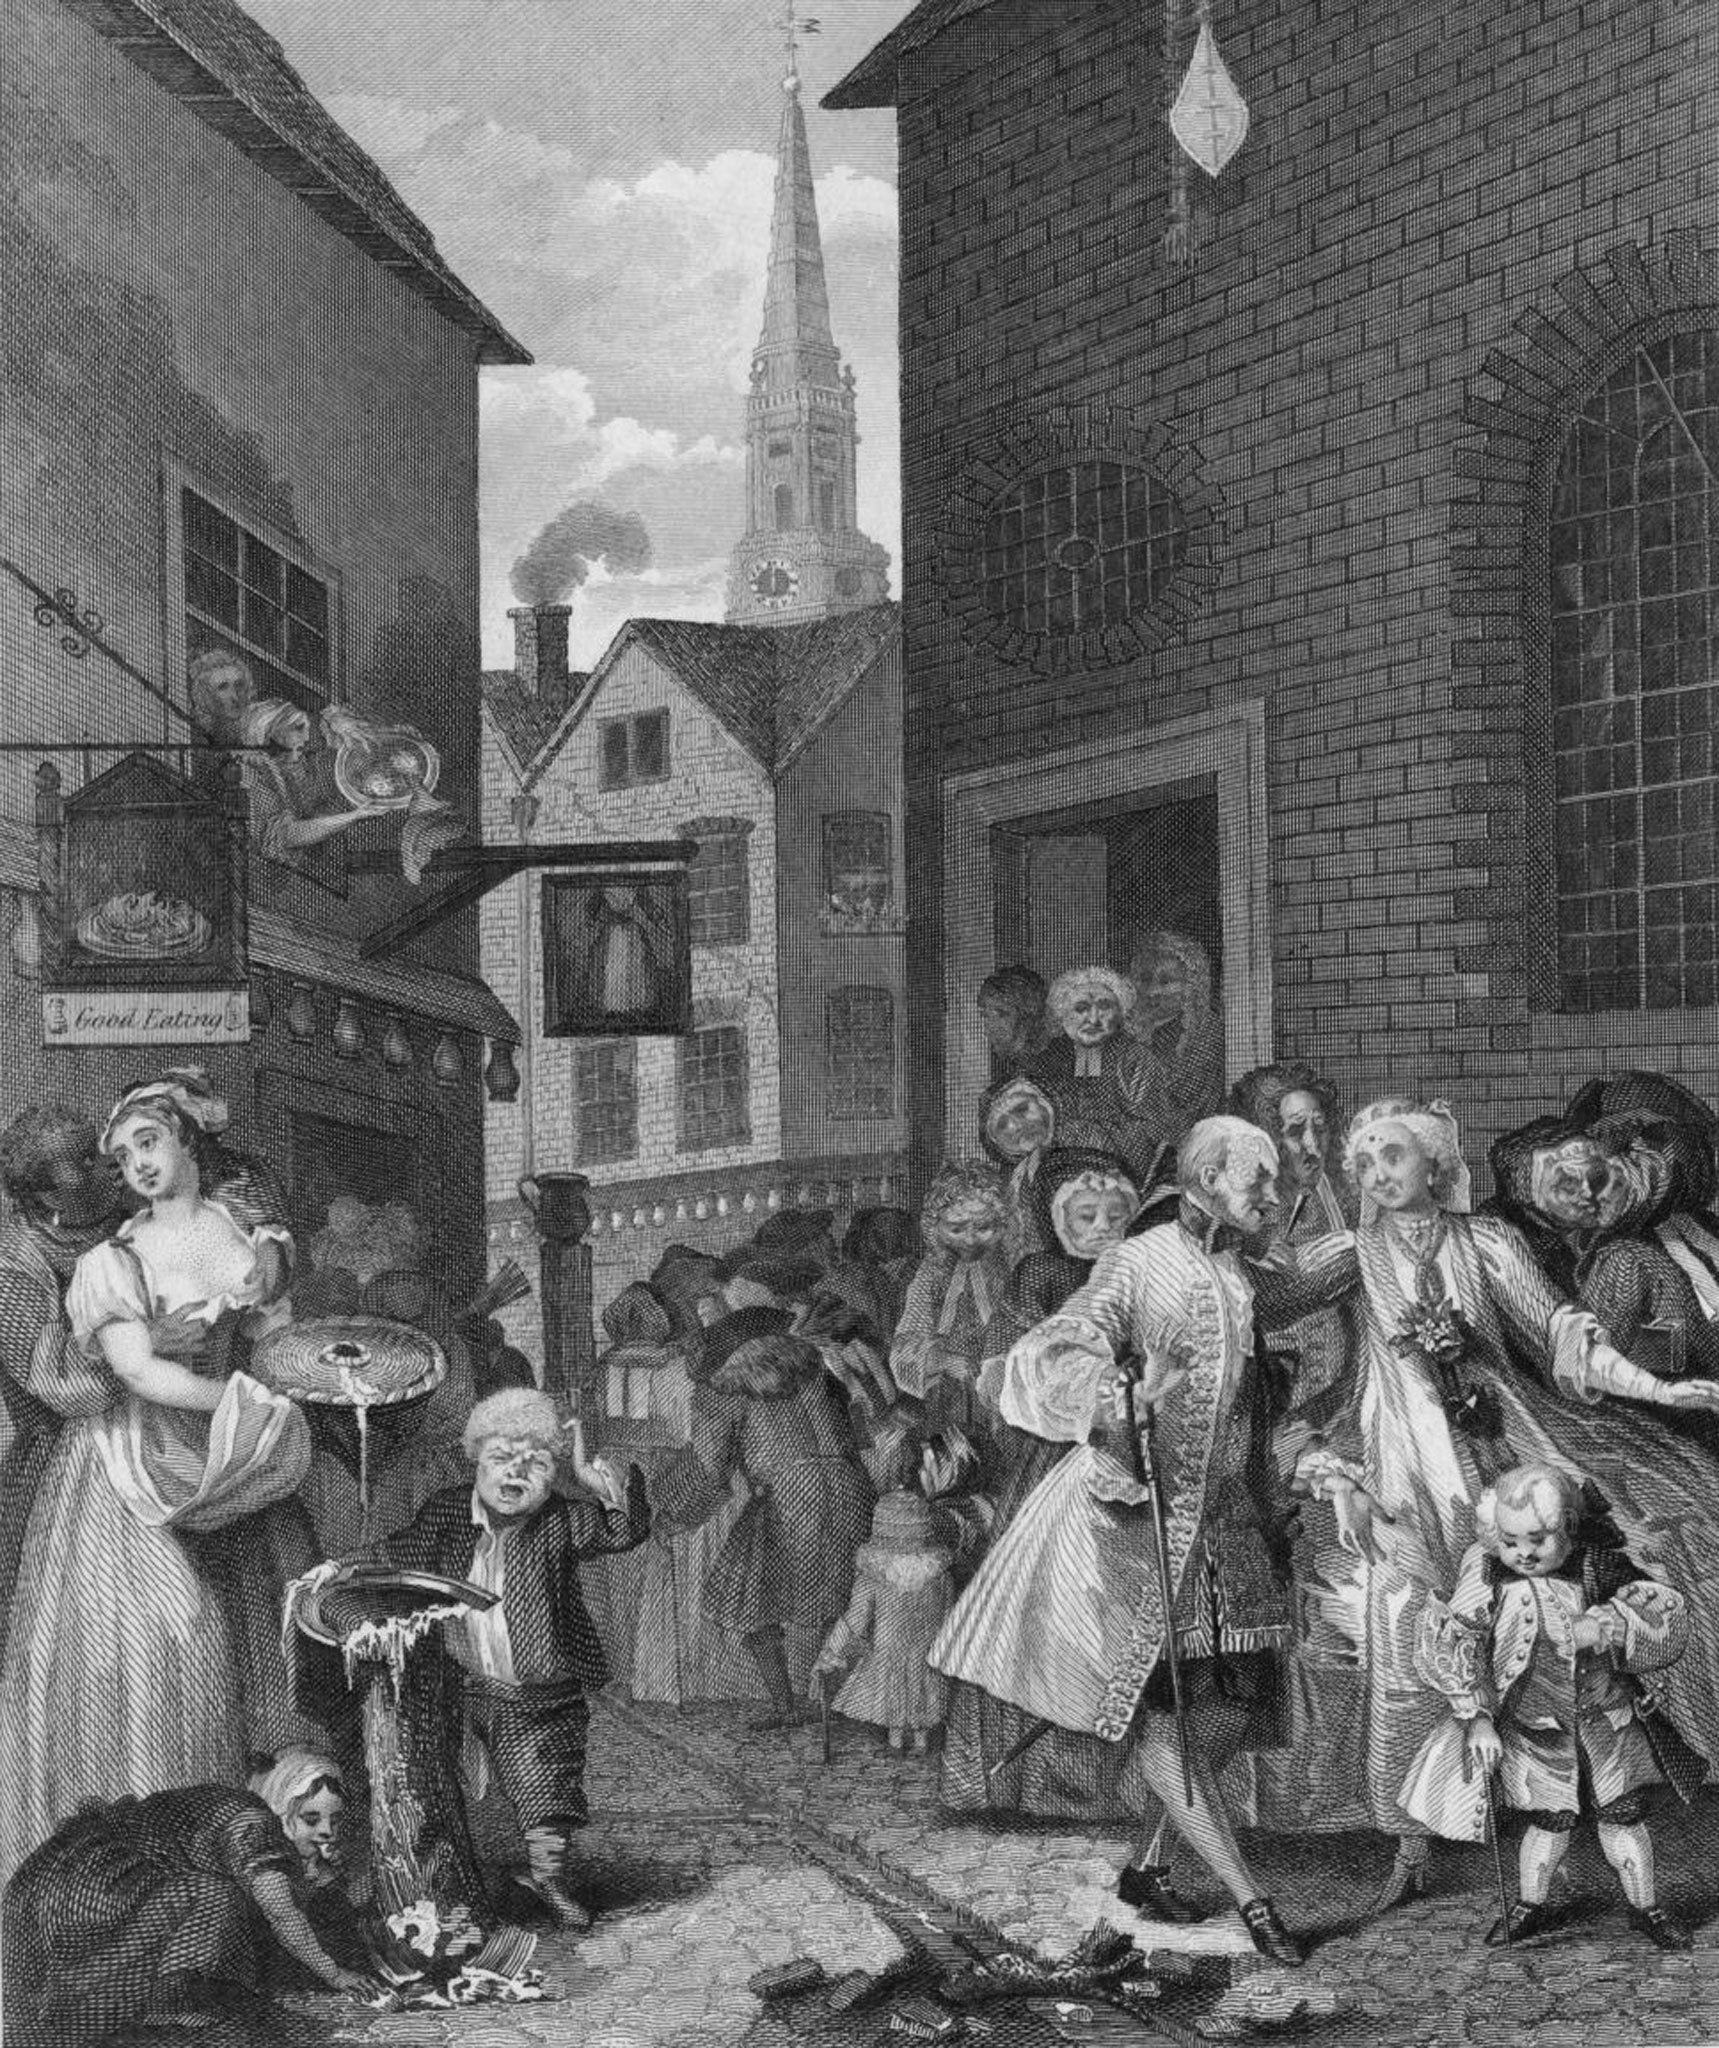 'Noon', William Hogarth's painting of Huguenots leaving church in what is now Soho in 1736 (Getty)